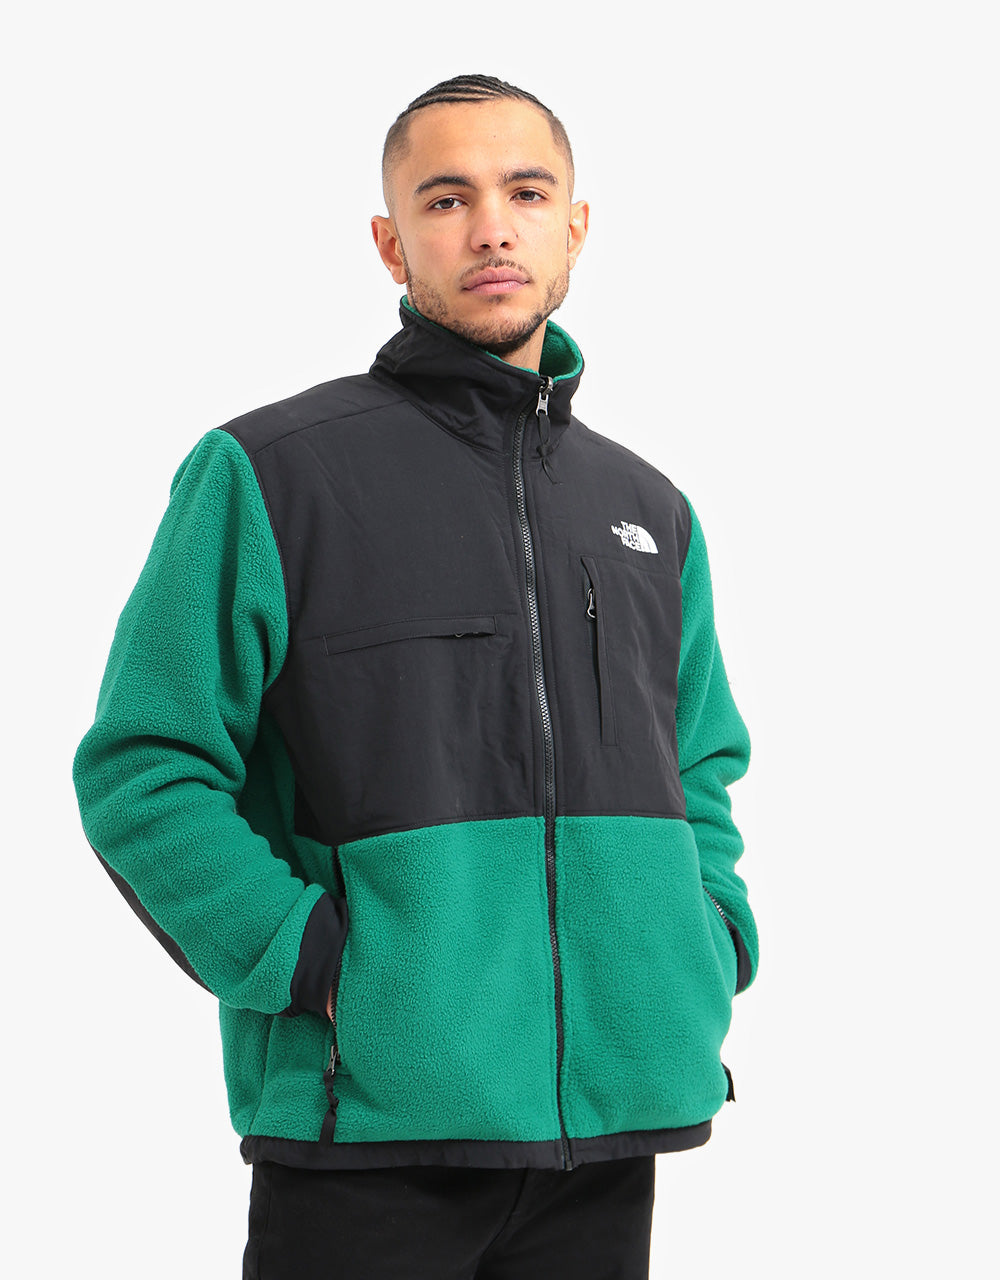 The North Face Denali 2 Jacket - Evergreen – Route One